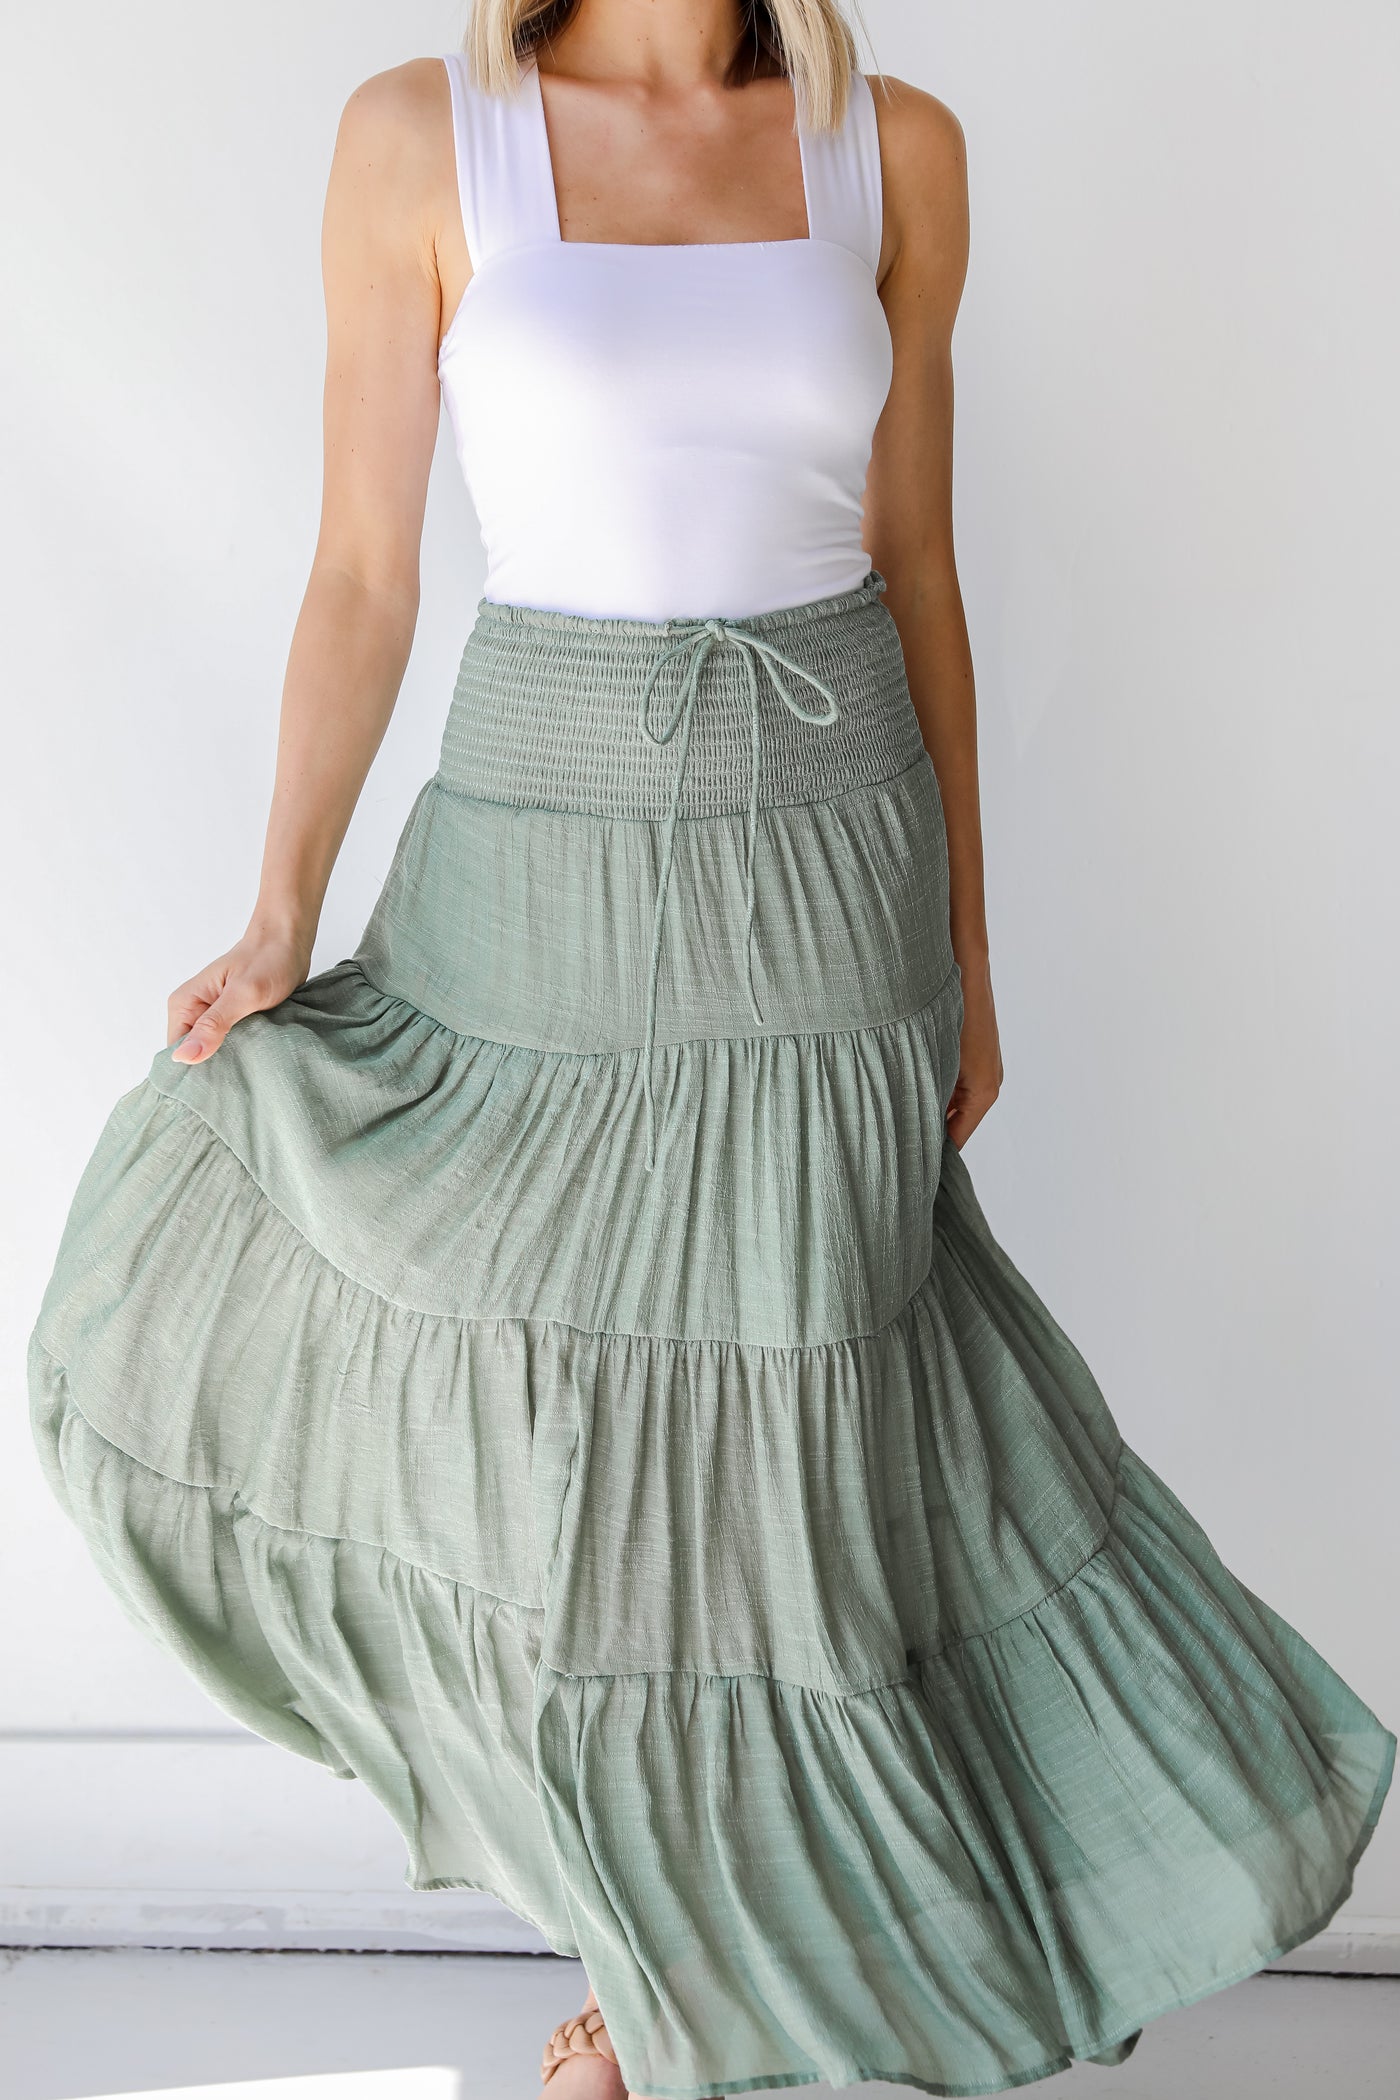 Tiered Maxi Skirt in olive on model